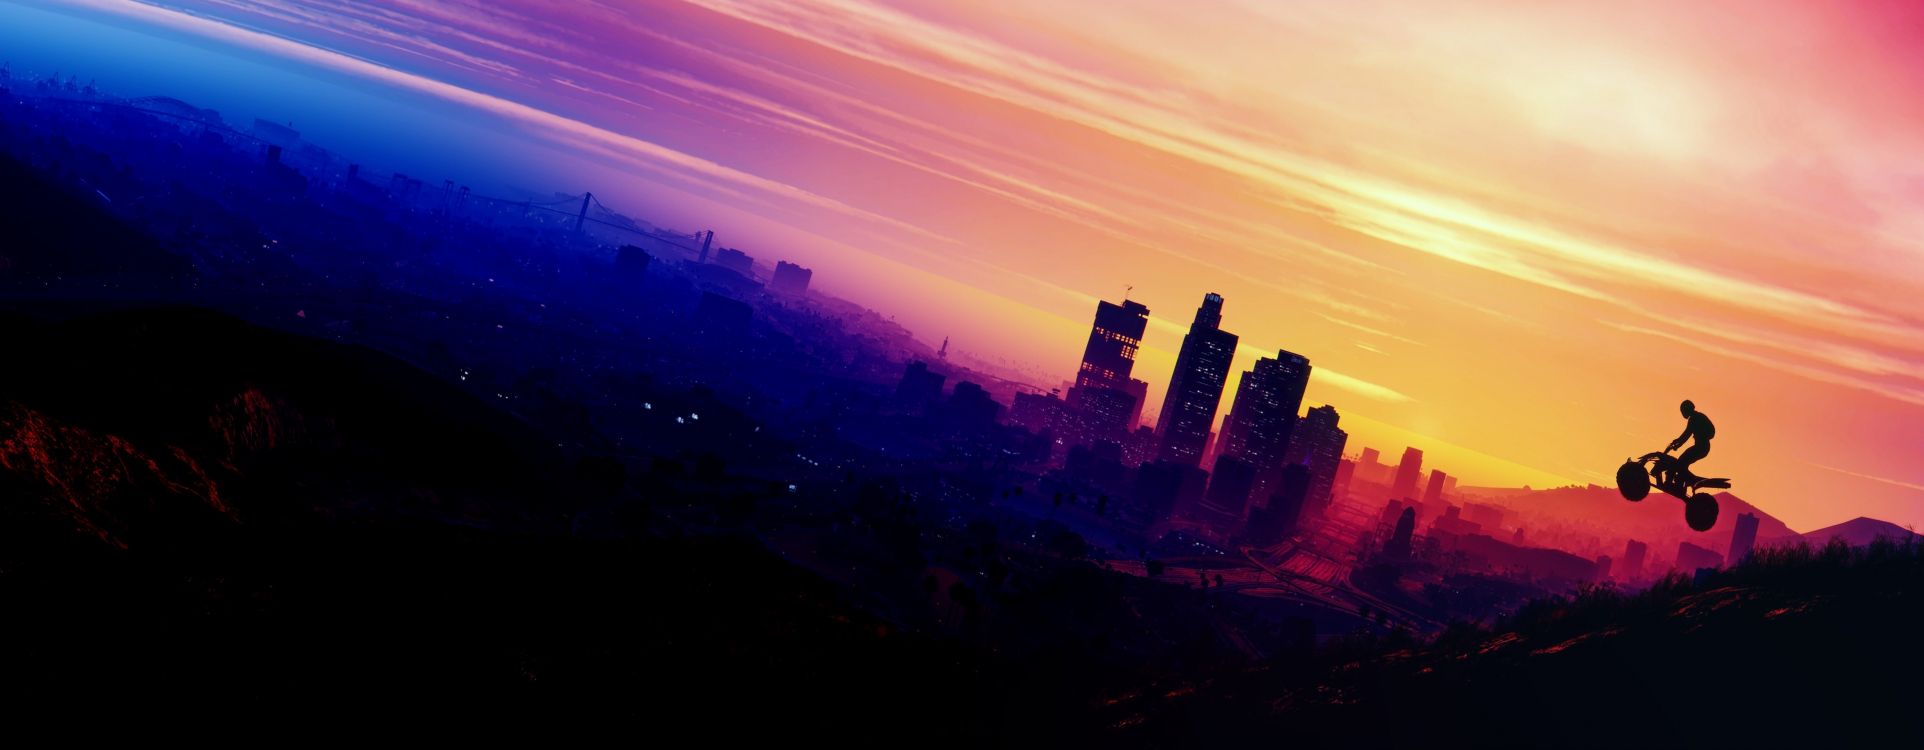 Grand Theft Auto v, Grand Theft Auto San Andreas, Horizont, Afterglow, Sonnenuntergang. Wallpaper in 4935x1923 Resolution